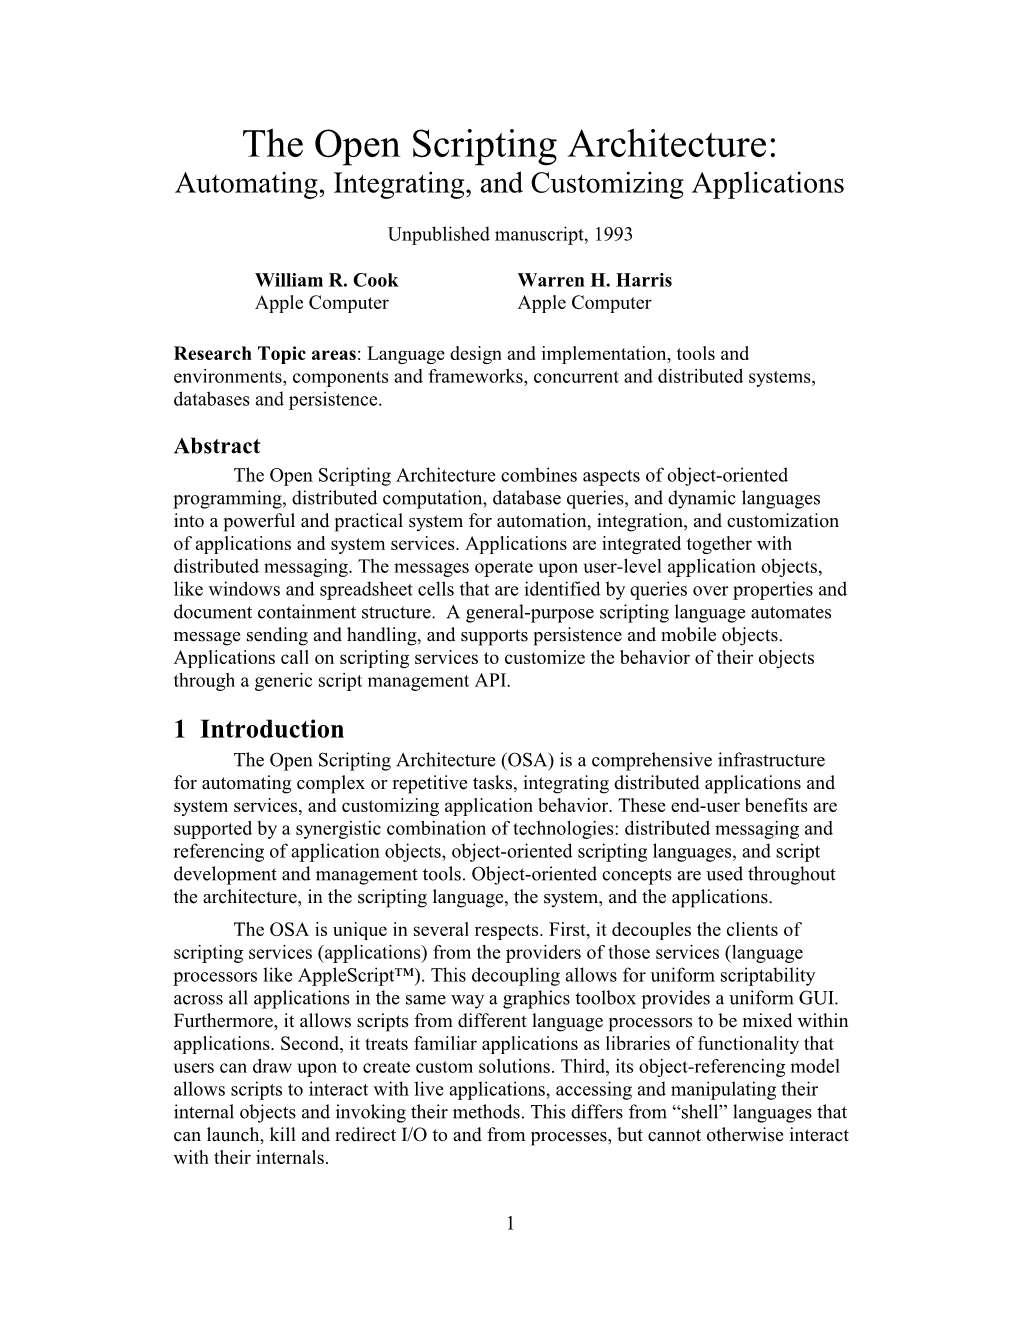 The Open Scripting Architecture: Automating, Integrating, and Customizing Applications